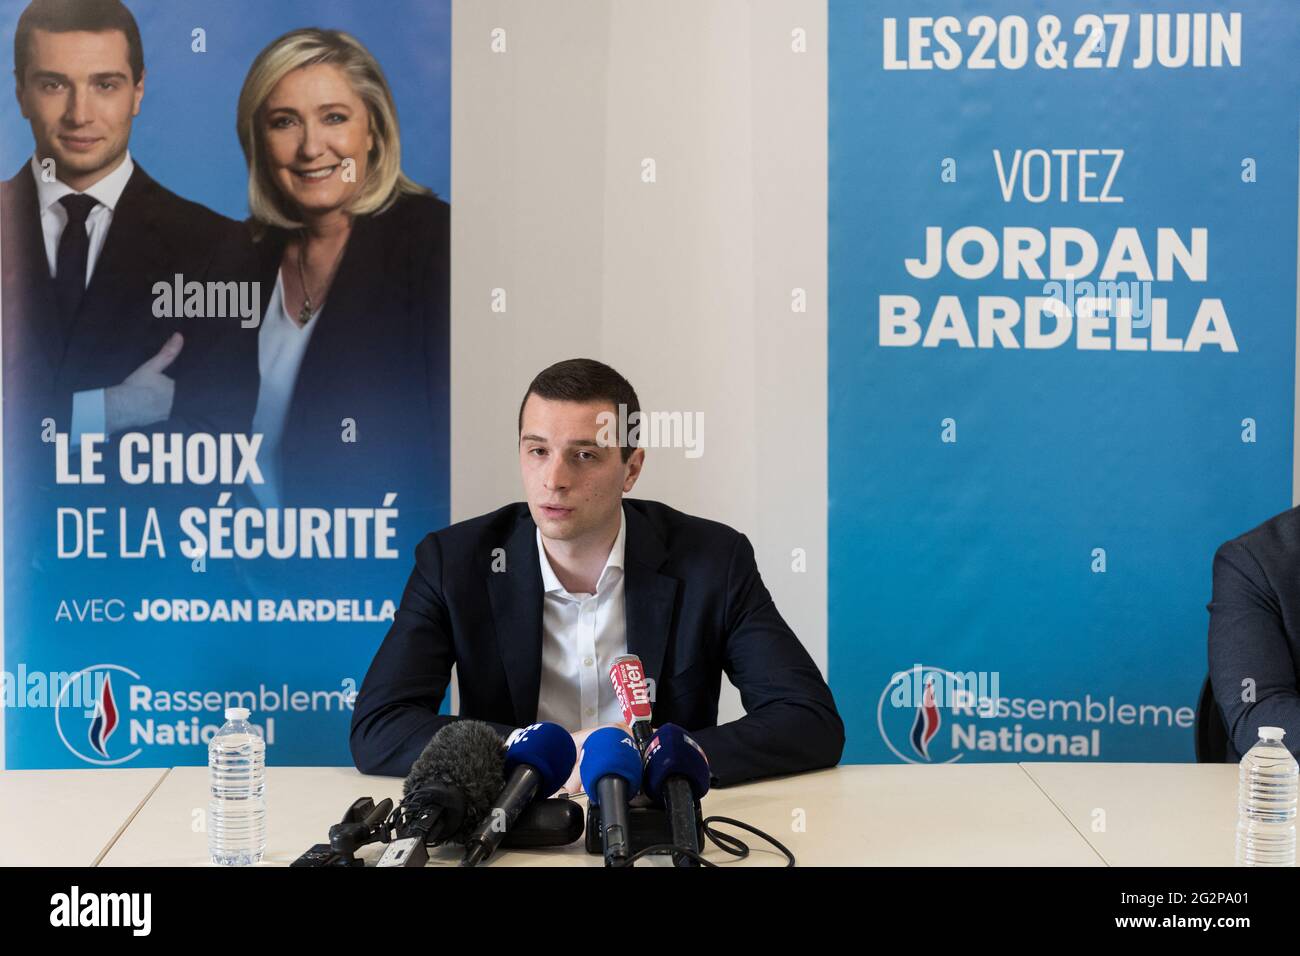 Jordan Bardella, Member of Parliament and head of list for the  Rassemblement National (far right) in the region Ile de France, talks tp  the press before a campaign meeting. Mormant, France, June